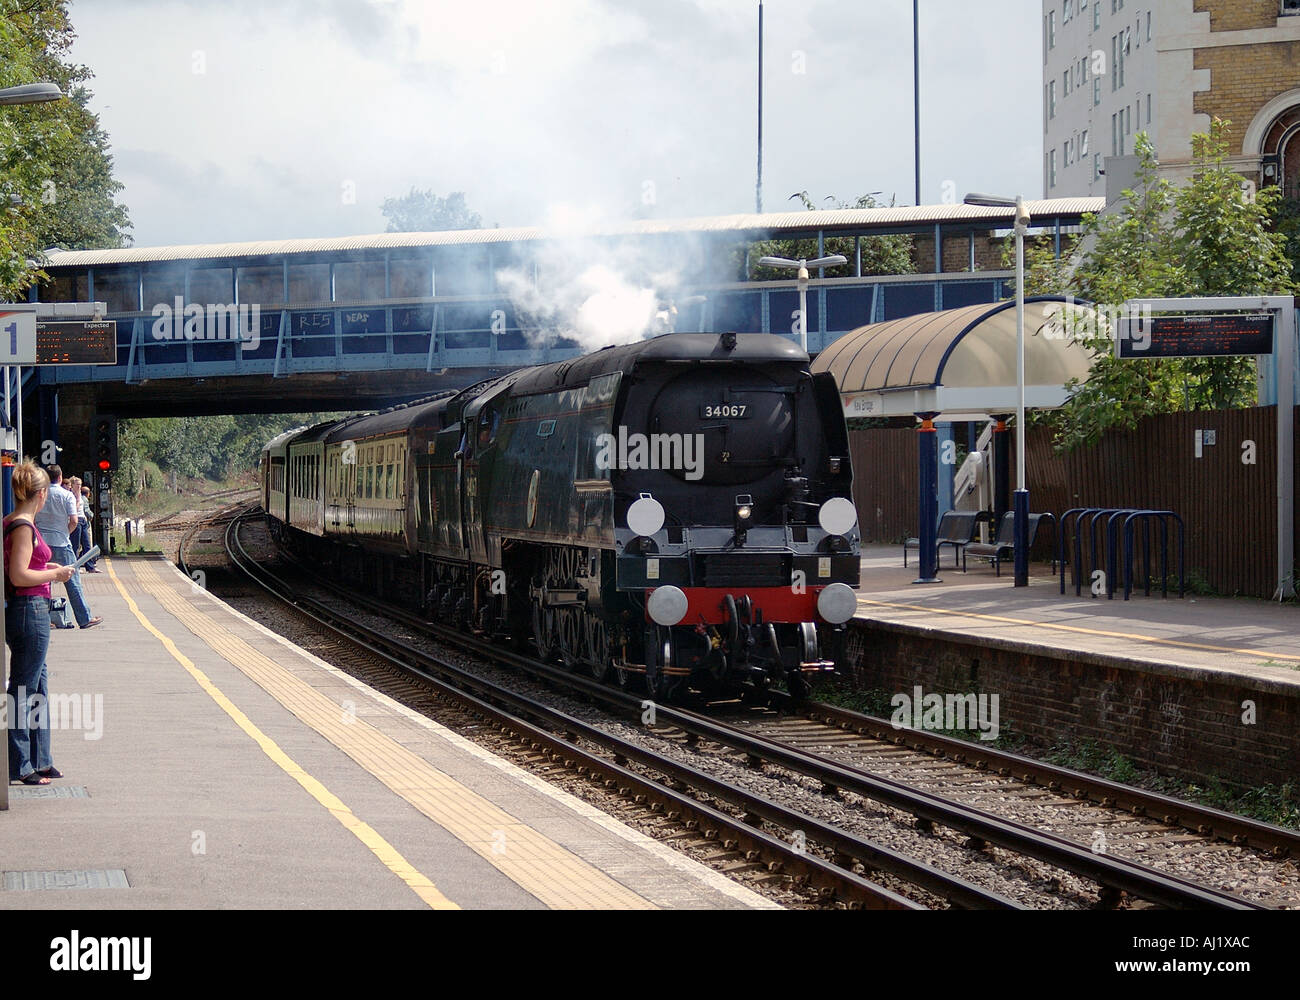 Battle of Britain Class Locomotive Tangmere with The Cathedrals Express at Kew Bridge Station Stock Photo